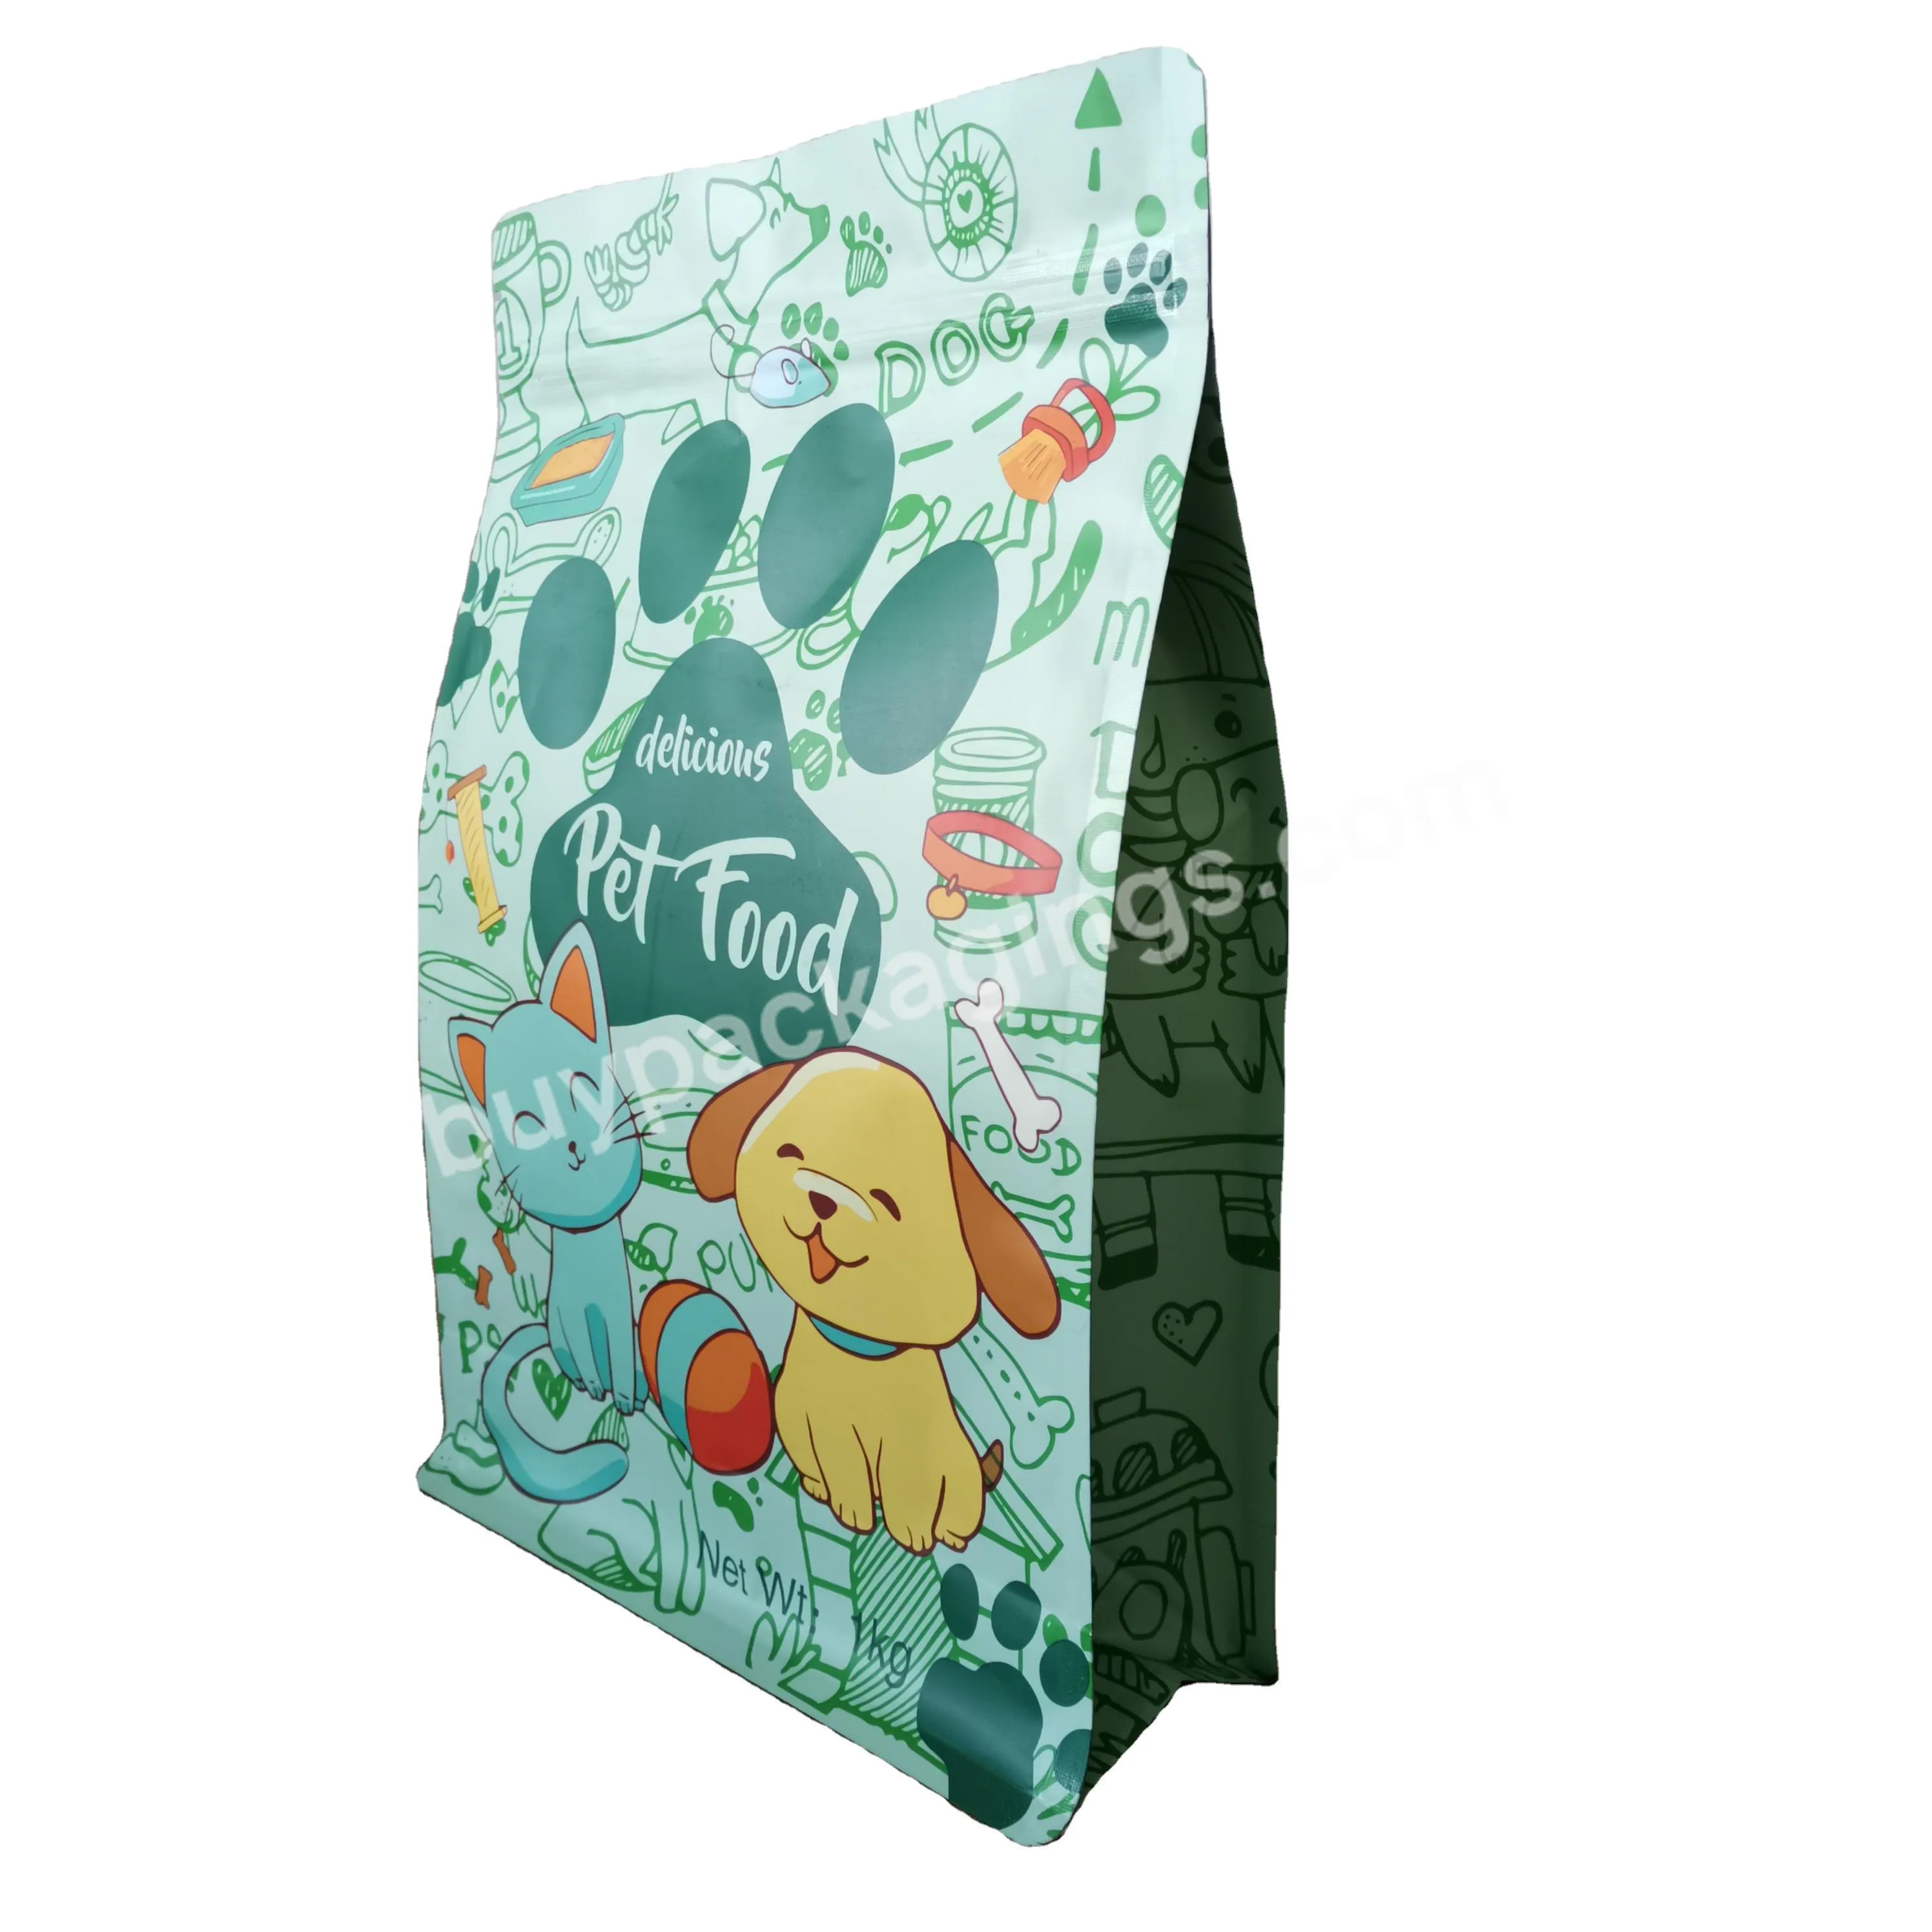 Custom Mylar Plastic Flat Bottom Pouch Cat Dog Pet Food Packaging Bag With Resealable Zipper - Buy Cat Food Bags With Zipper,Pet Dog Food Bag,Flat Bottom Pouch.